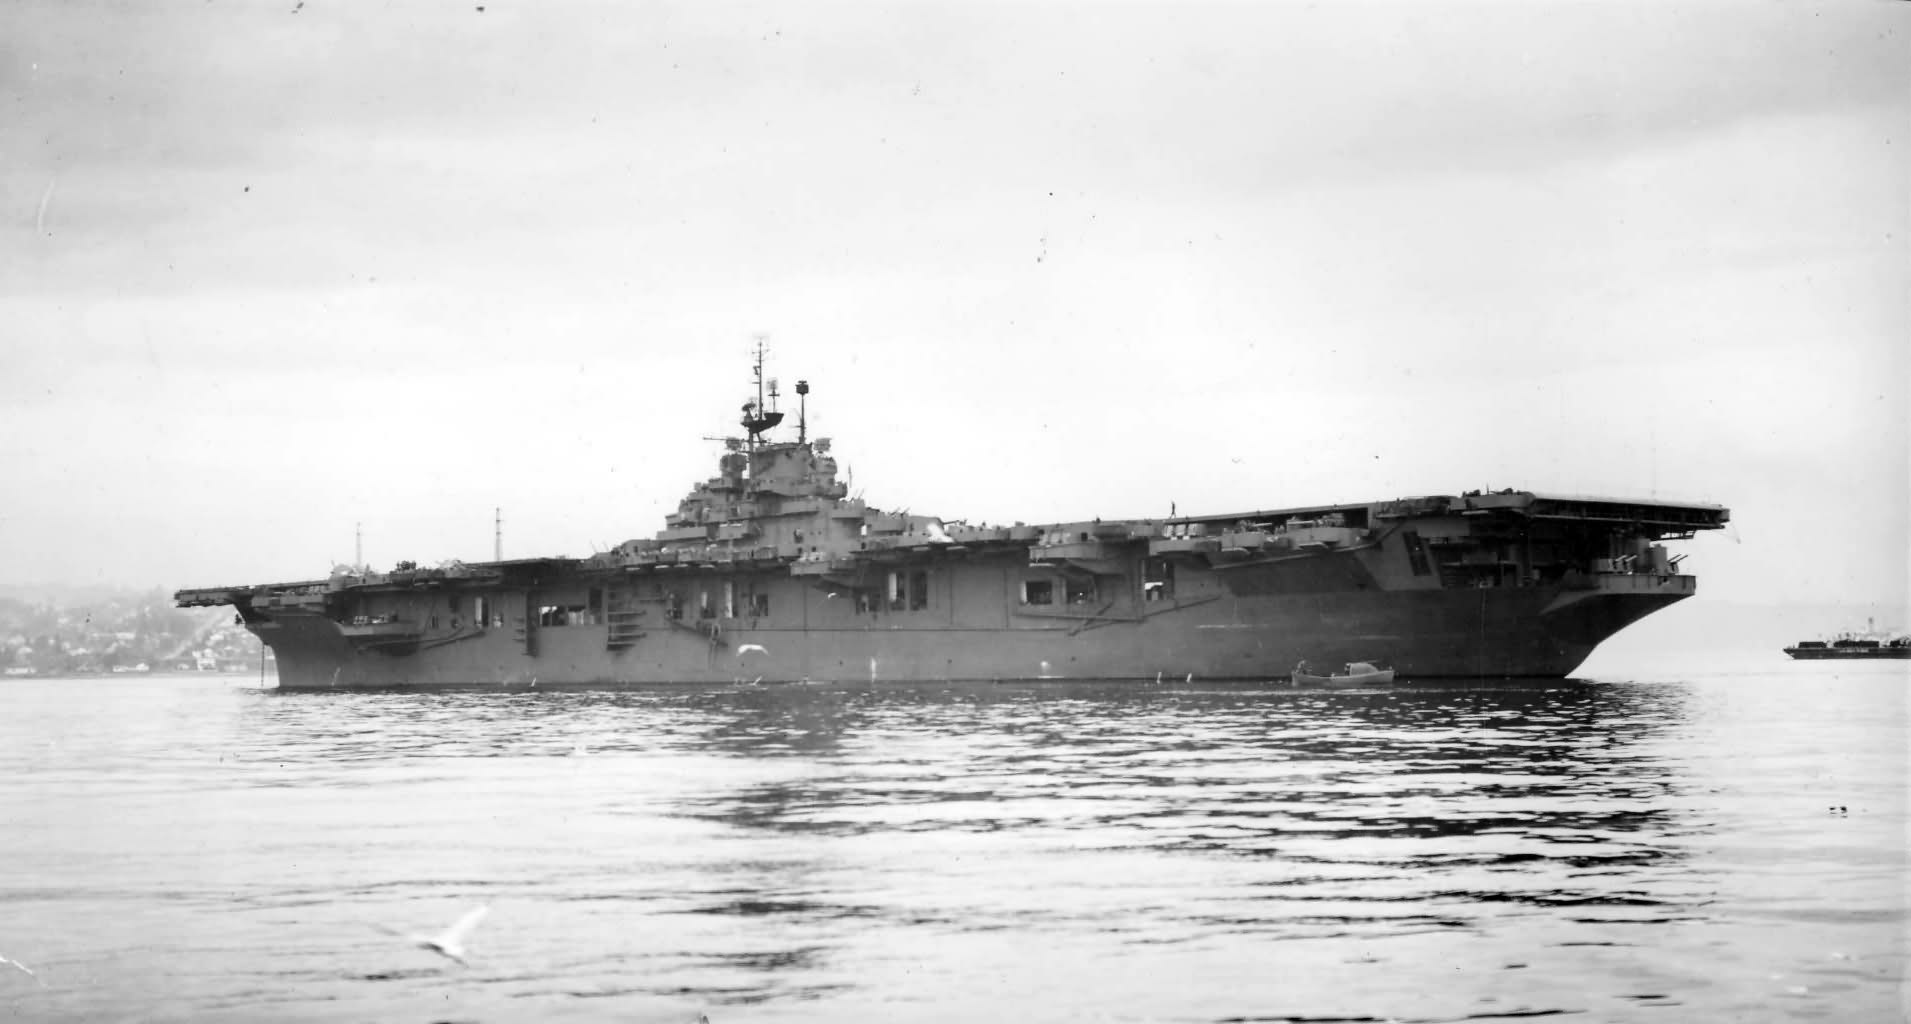 USS Franklin CV-13 anchored at the Puget Sound Navy Yard January 1945